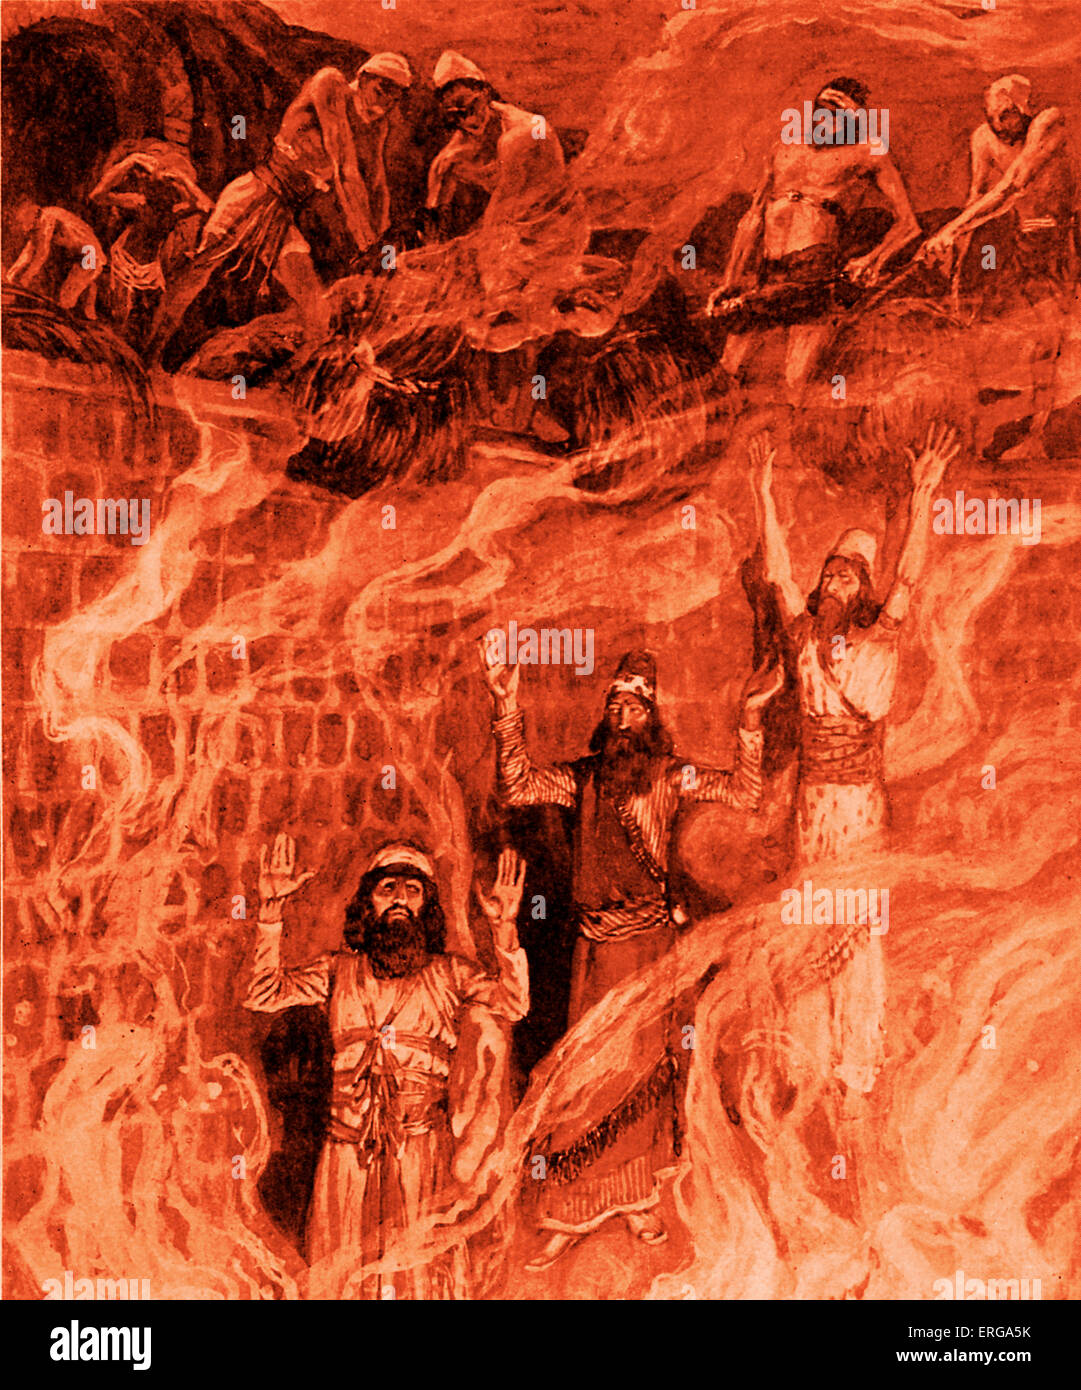 In the fiery furnace by J James Tissot. Illustration to the Book of Daniel, 3.24: 'Then Nebuchandnezzar the king was astonished, and rose up in haste, and spake, and said unto his counsellors, Did not we cast three men bound into the midst of the fire? They answered and said unto the king, True, O king'. Nebuchandnezzar erects a golden idol which Hananiah, Mishael and Azariah refuse to worship. As punishment, they are thrown into a fiery pit. They are protected by Daniel and remain unscathed. JJT: French painter, 1836- 1902. Stock Photo